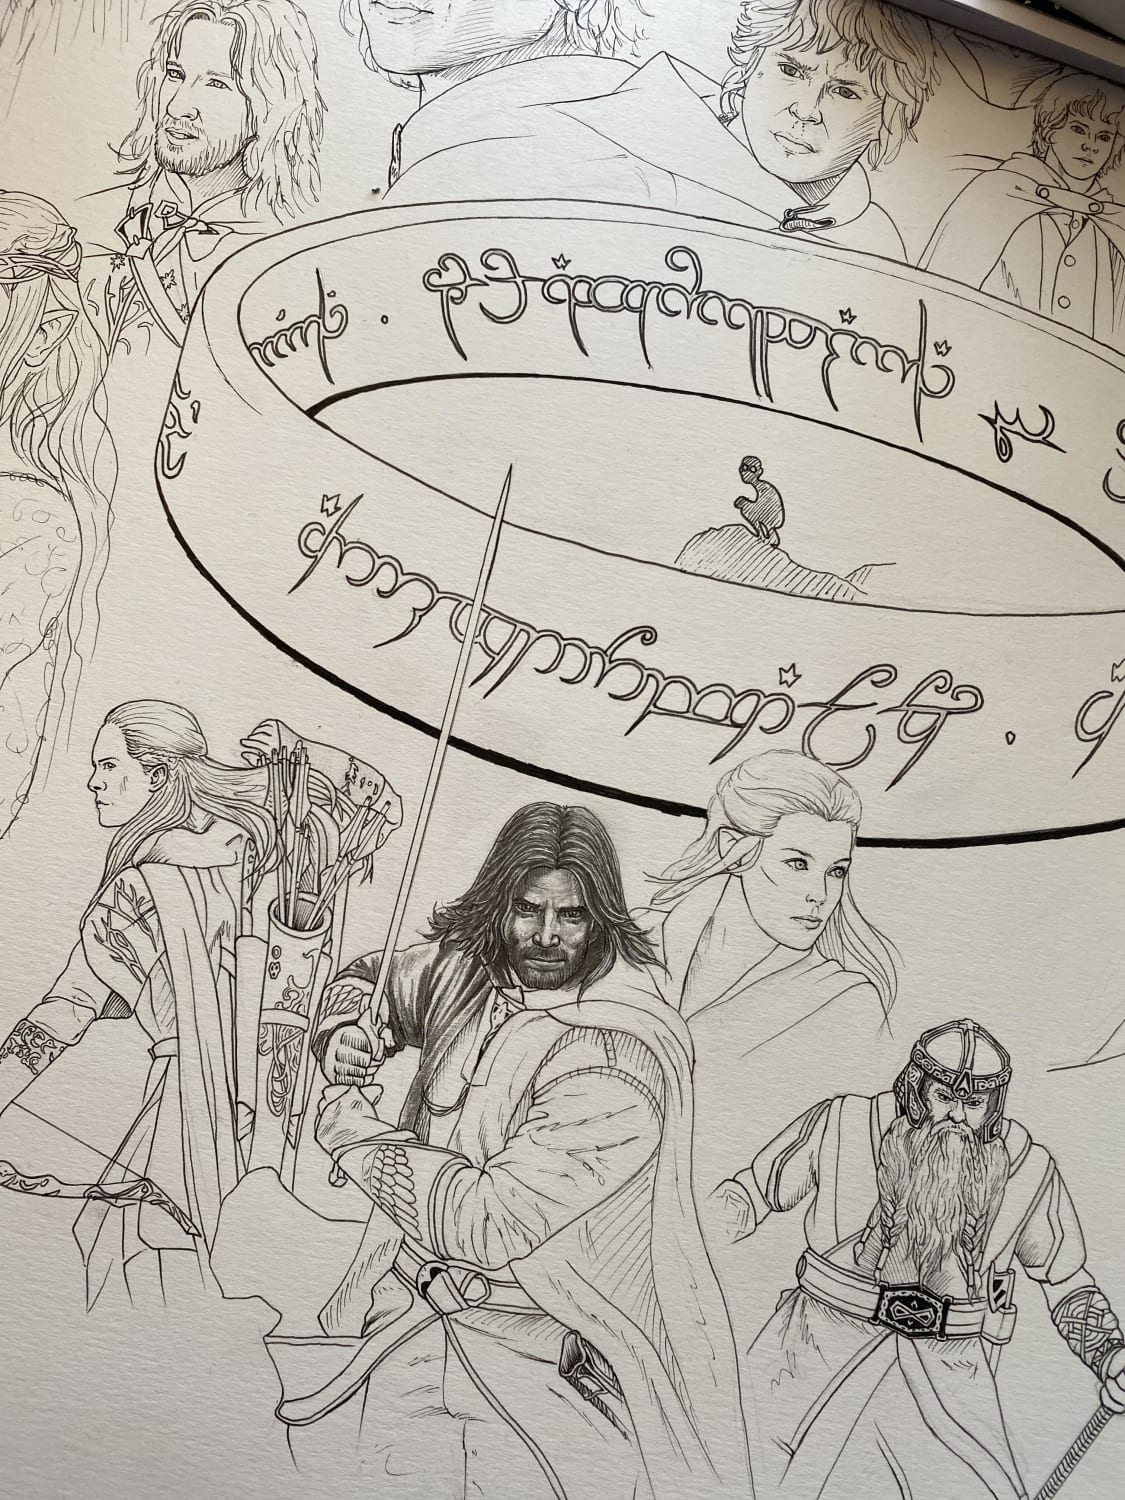 Lord of the Rings drawing in progress